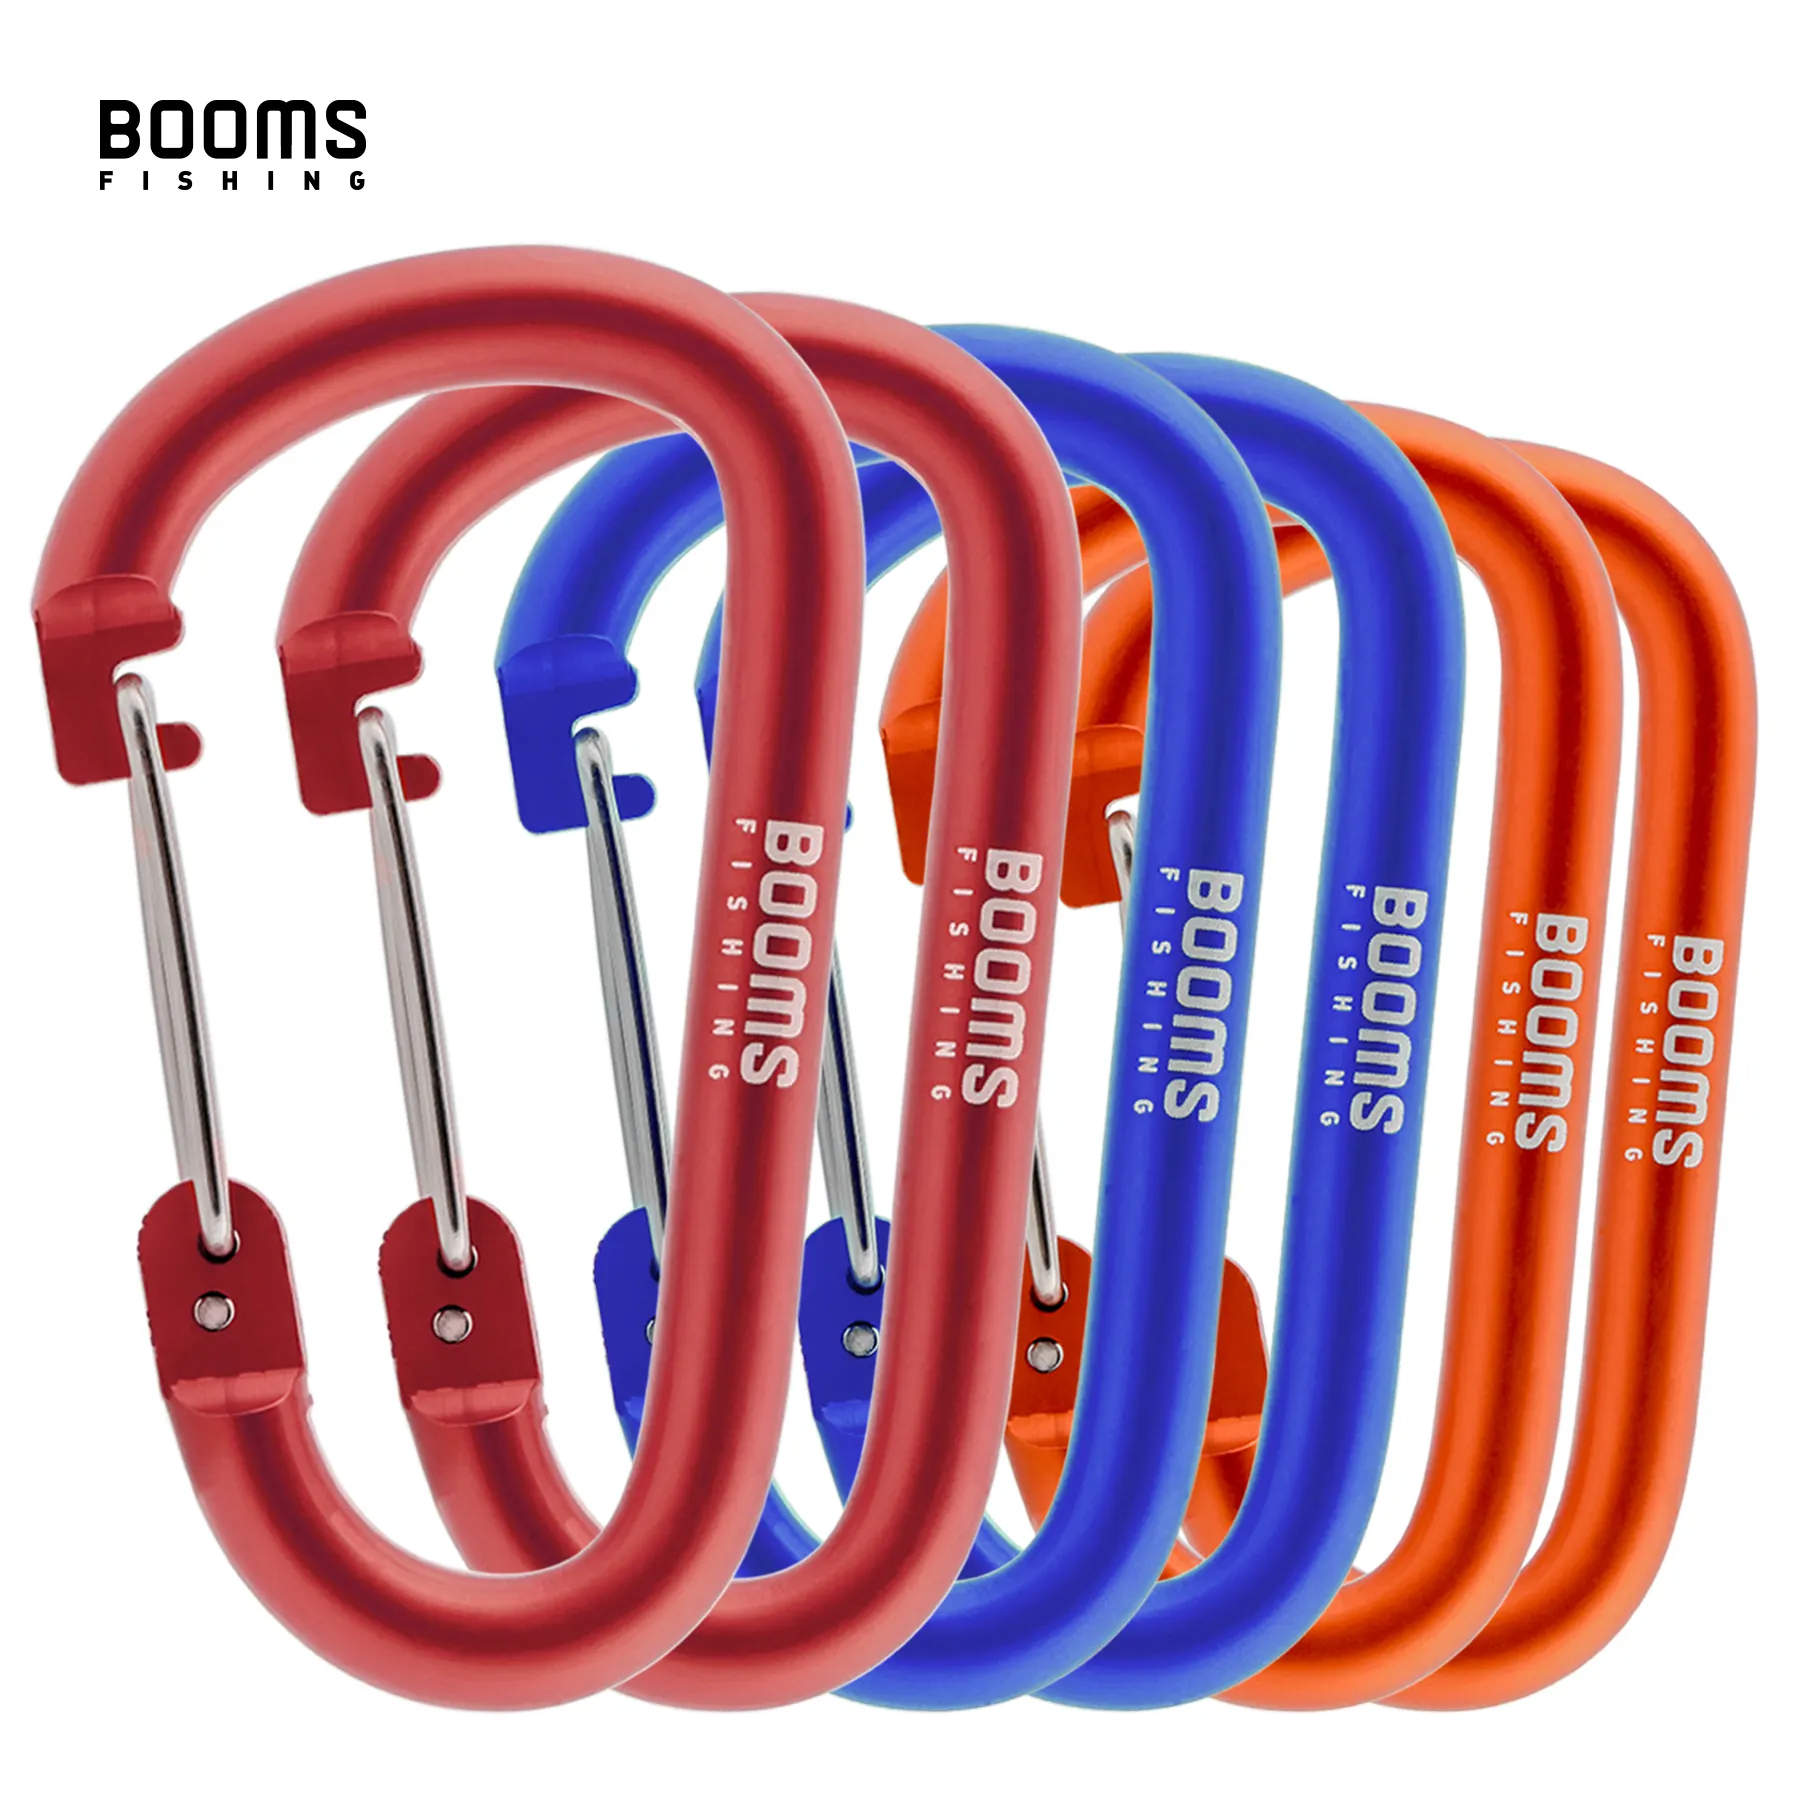 Booms Fishing CC3 6Pcs Aluminum Alloy Carabiner Large Keychain D Ring Outdoor Camping Climbing Clip Lock Buckle Hook Accessories